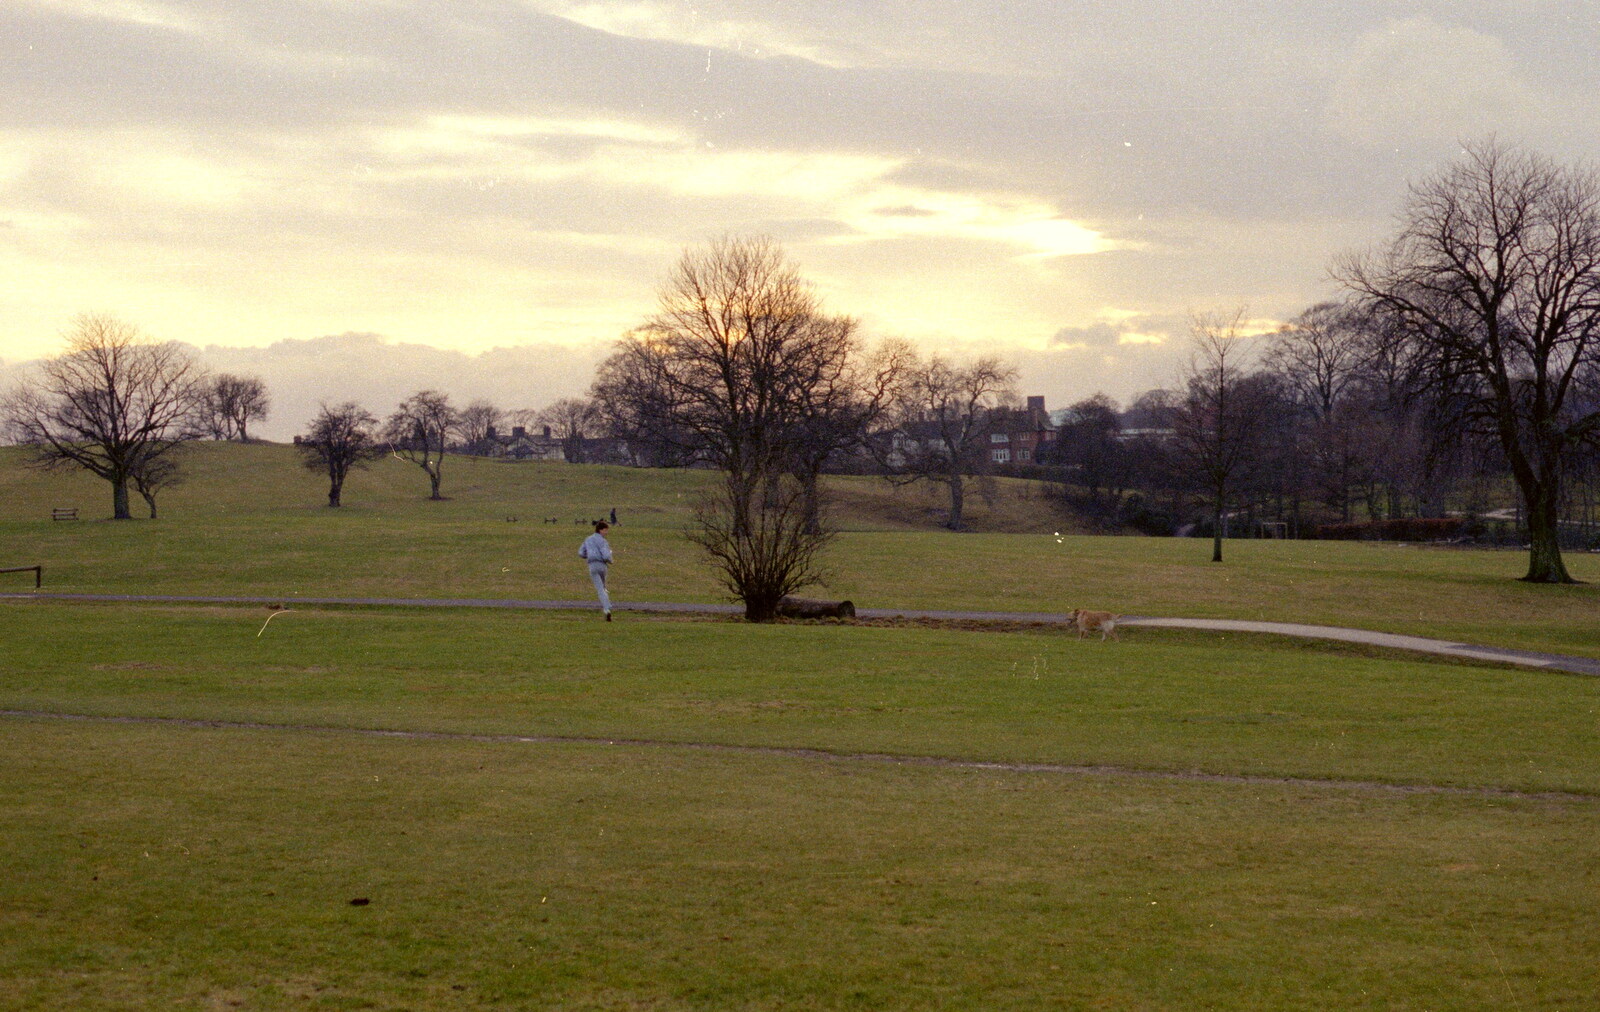 Sean runs around Ryles Park from Easter With Sean in Macclesfield, Cheshire - 6th April 1986